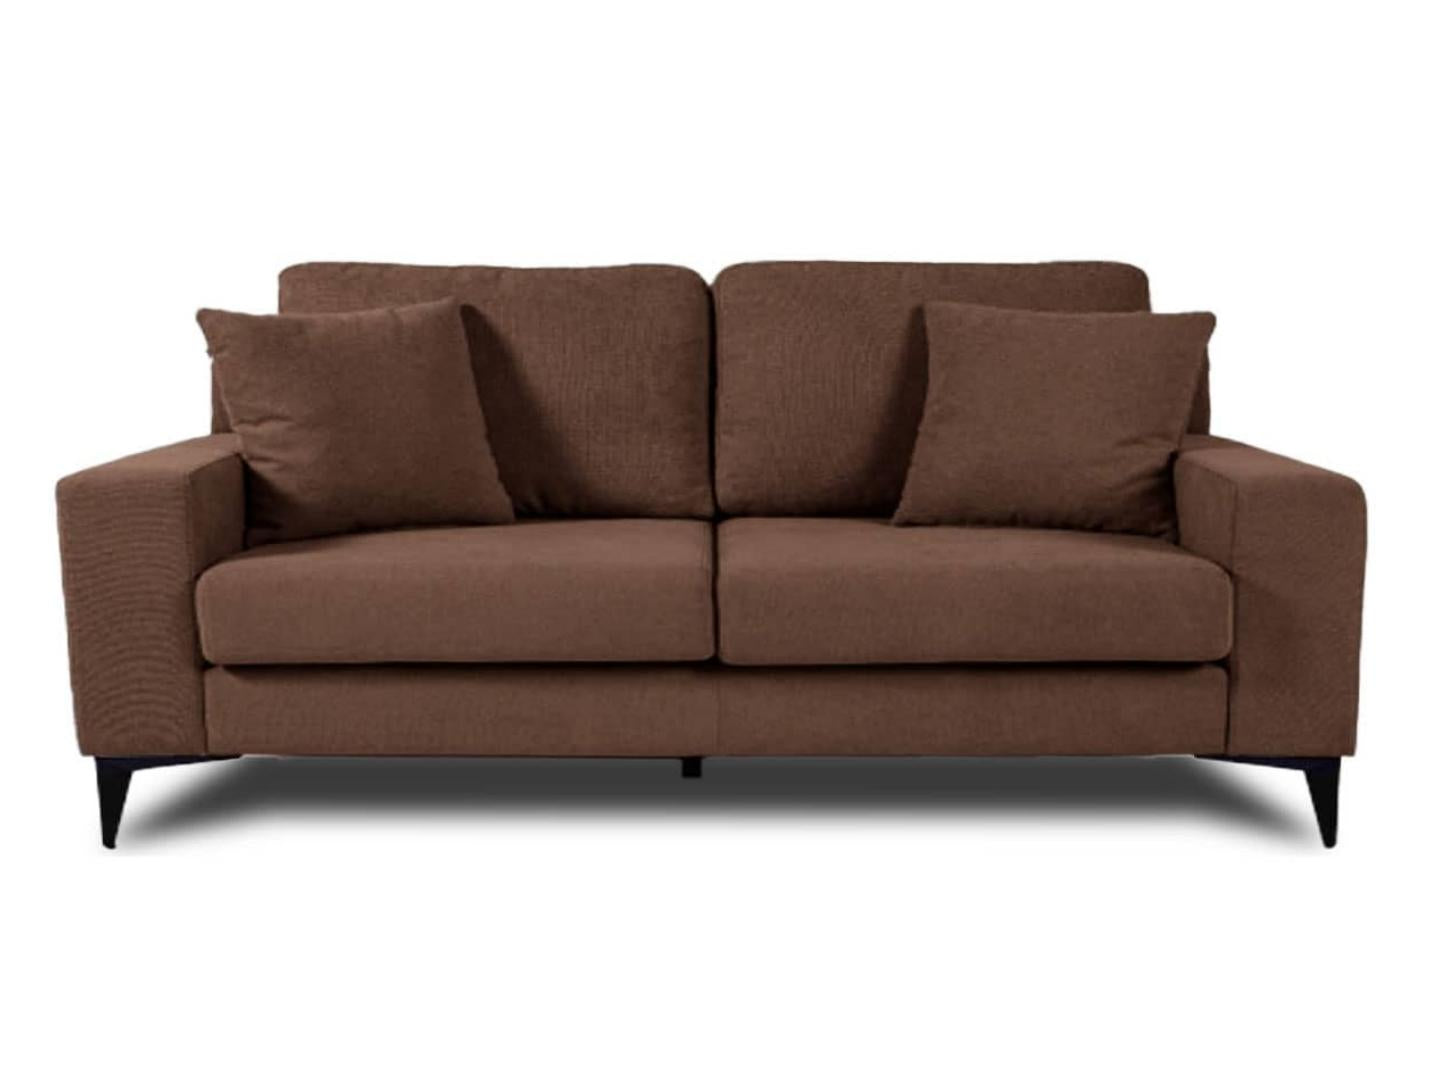 star sofa water and stain resistant fabric - Lux furniture